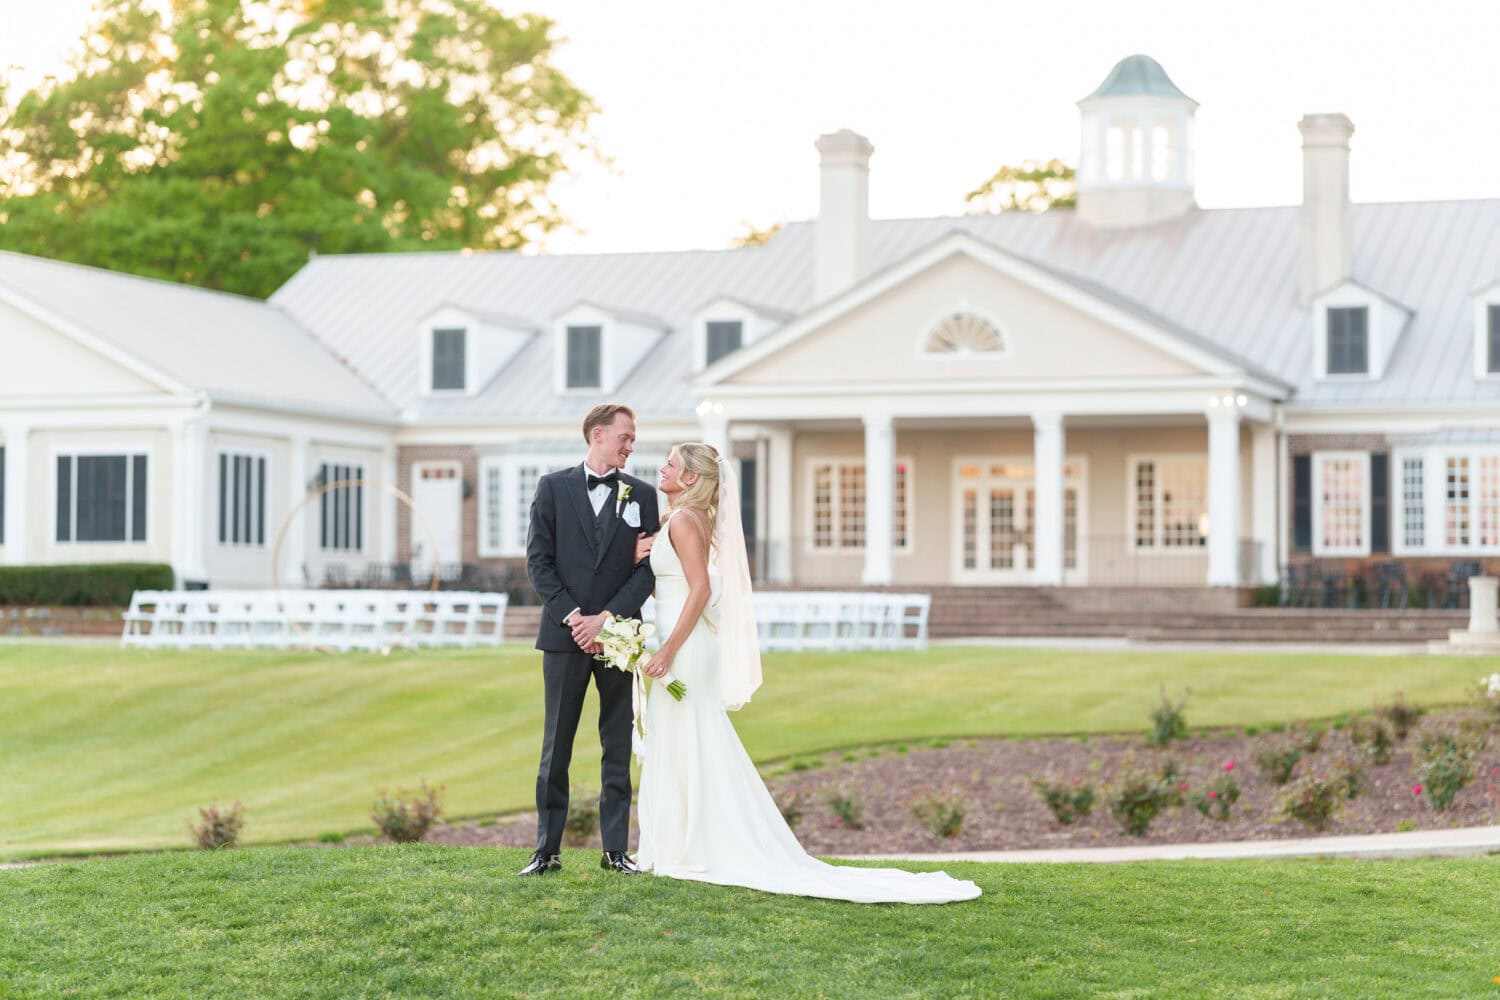 Bride and groom looking into each other's eyes with clubhouse in the background - Pawleys Plantation